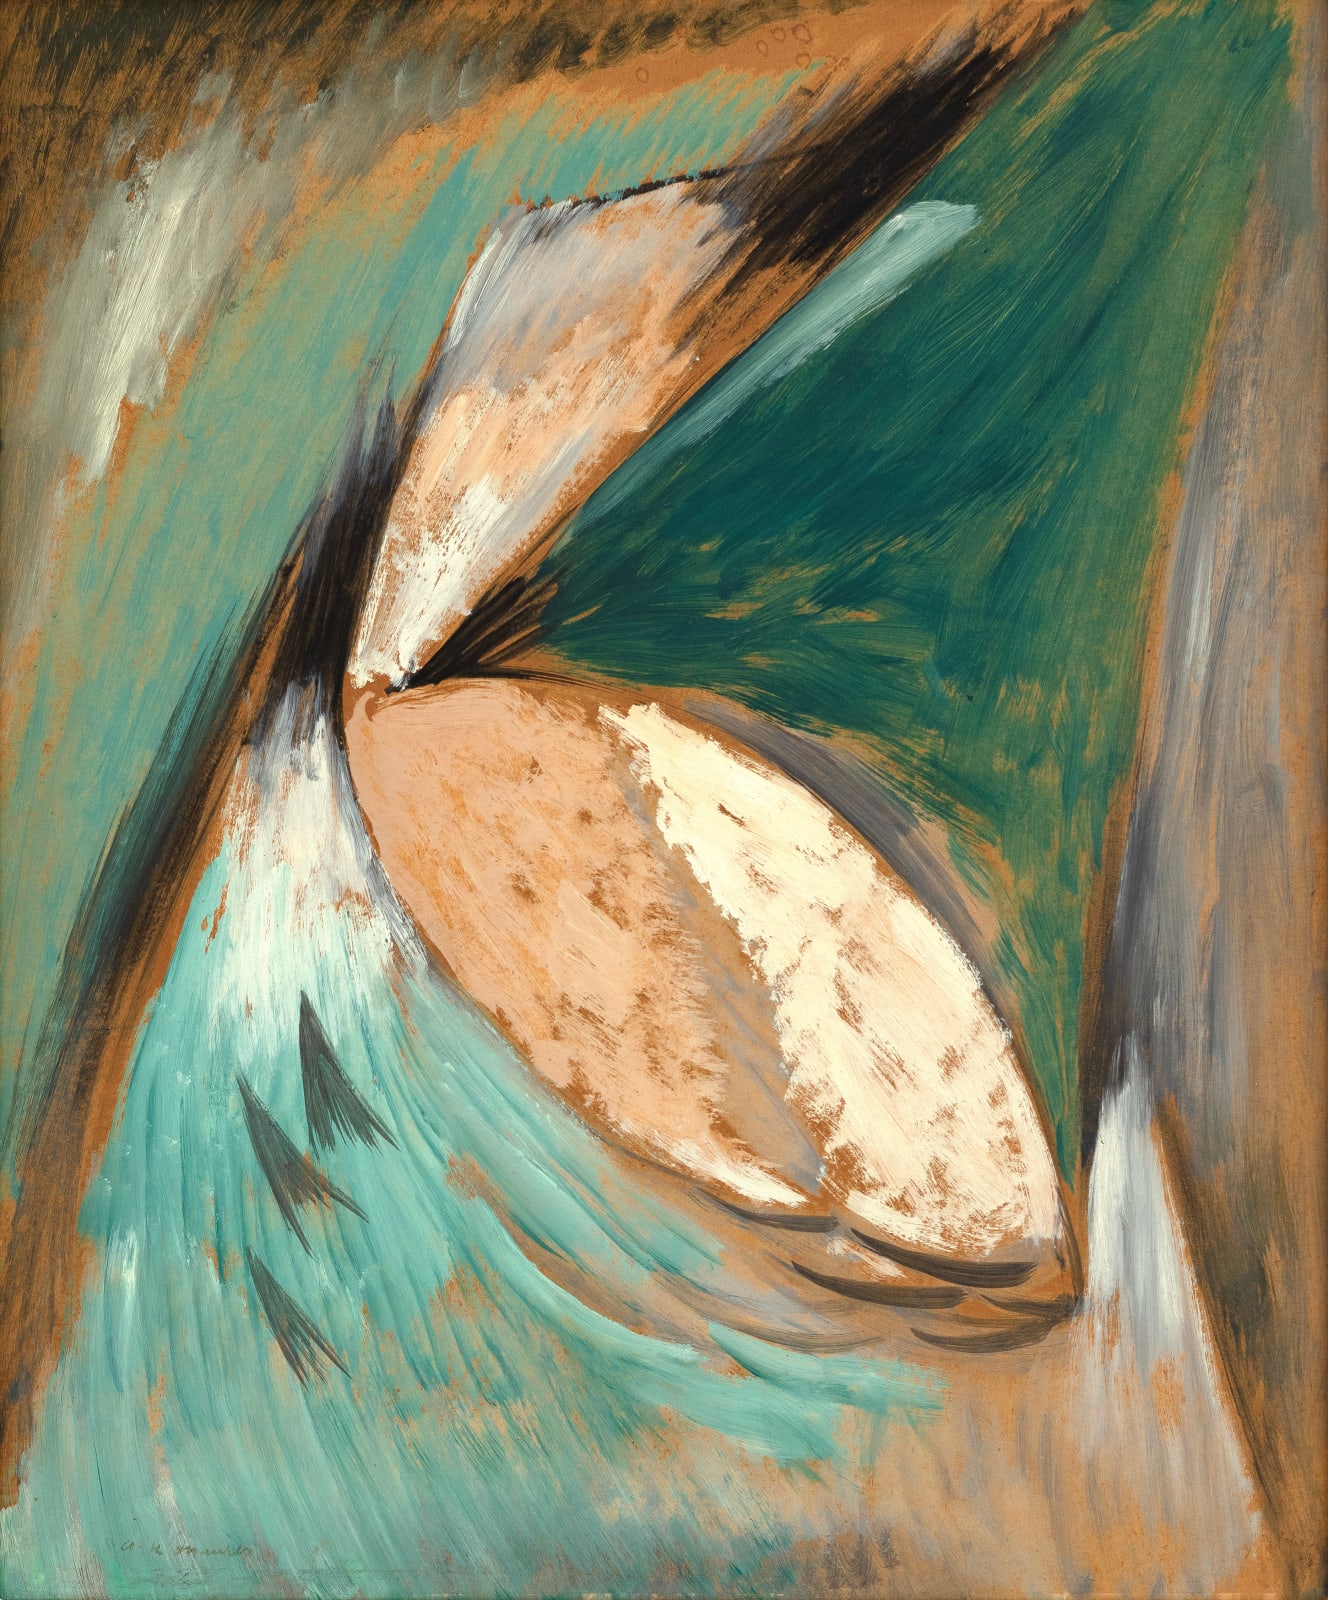 Alfred Maurer, Abstraction: Fishing, c. 1919-20